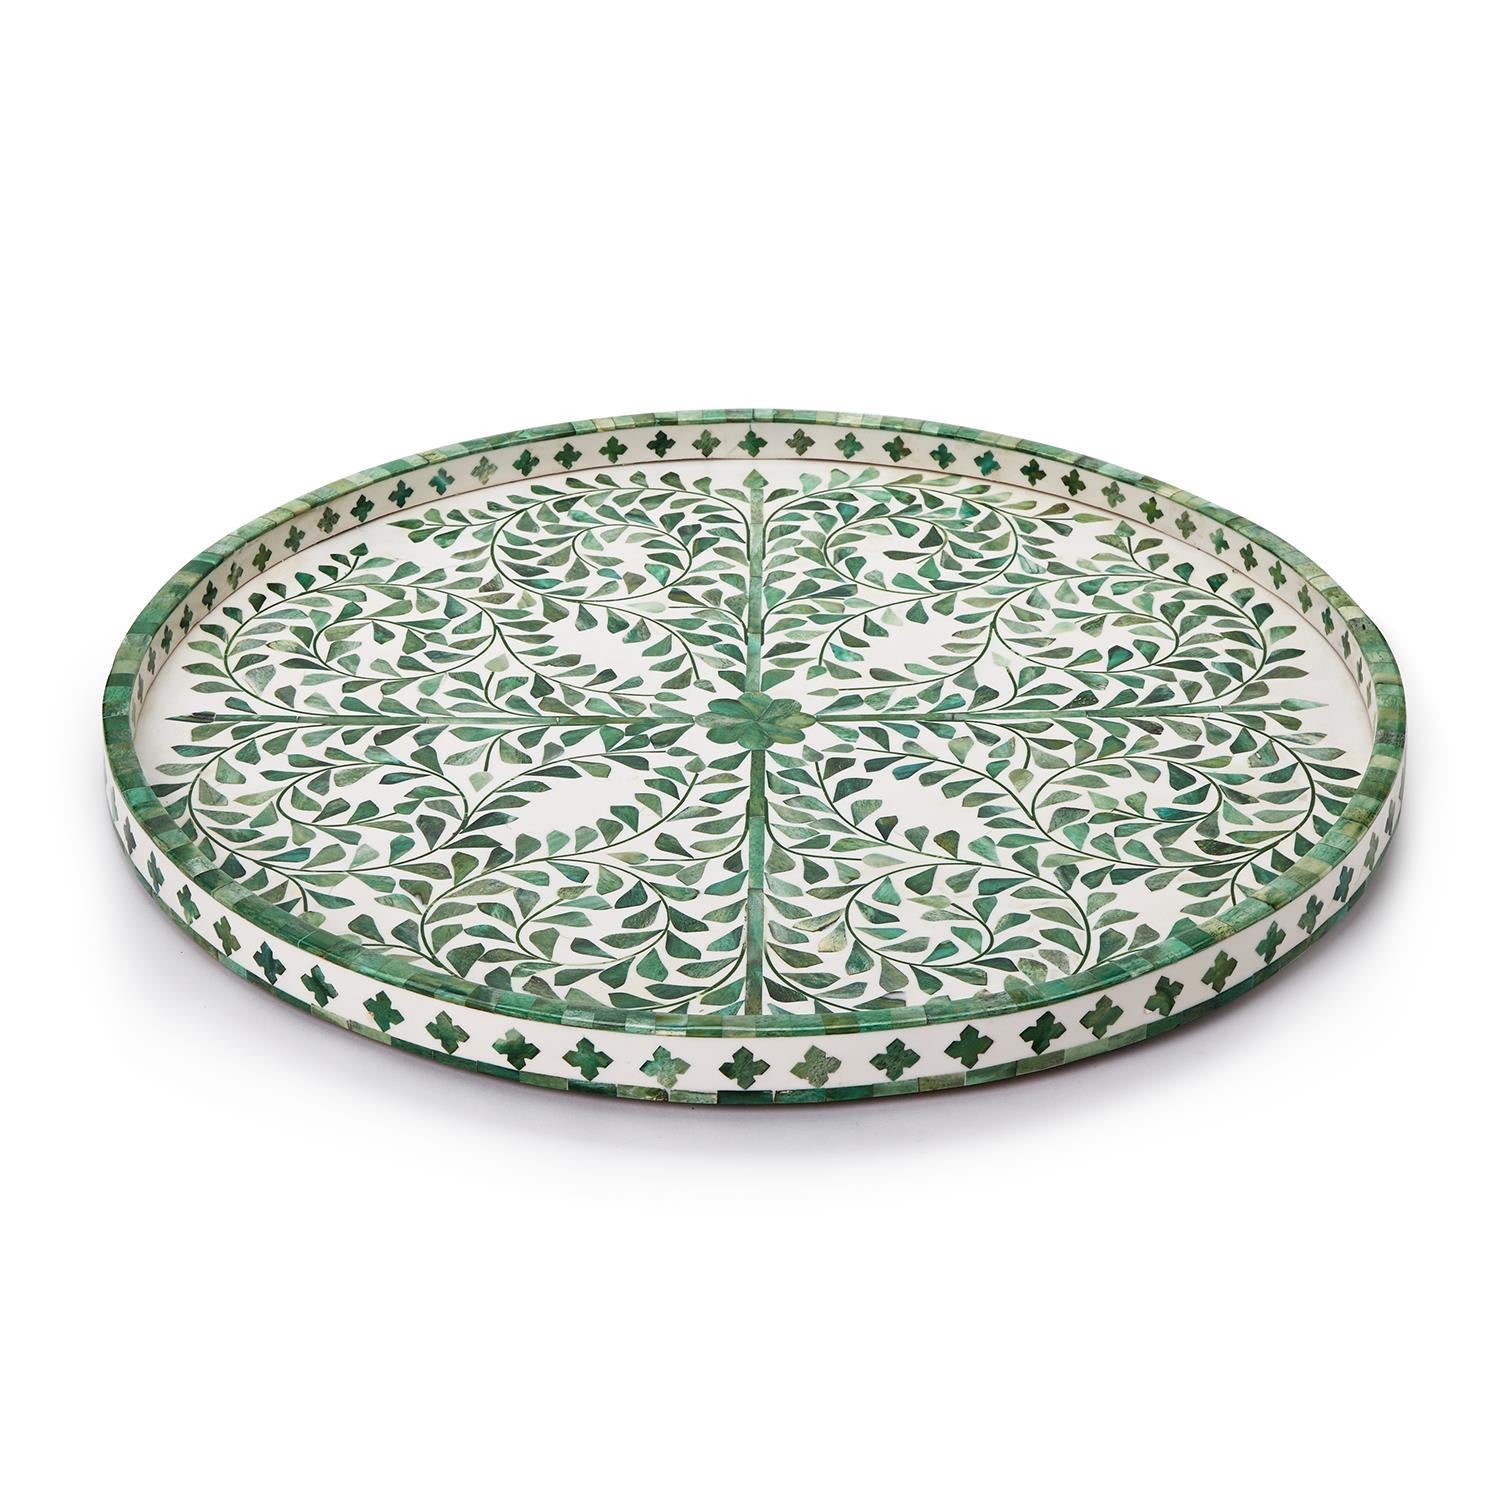 Grn/Wht Inlaid Decorative Round Serving Tray